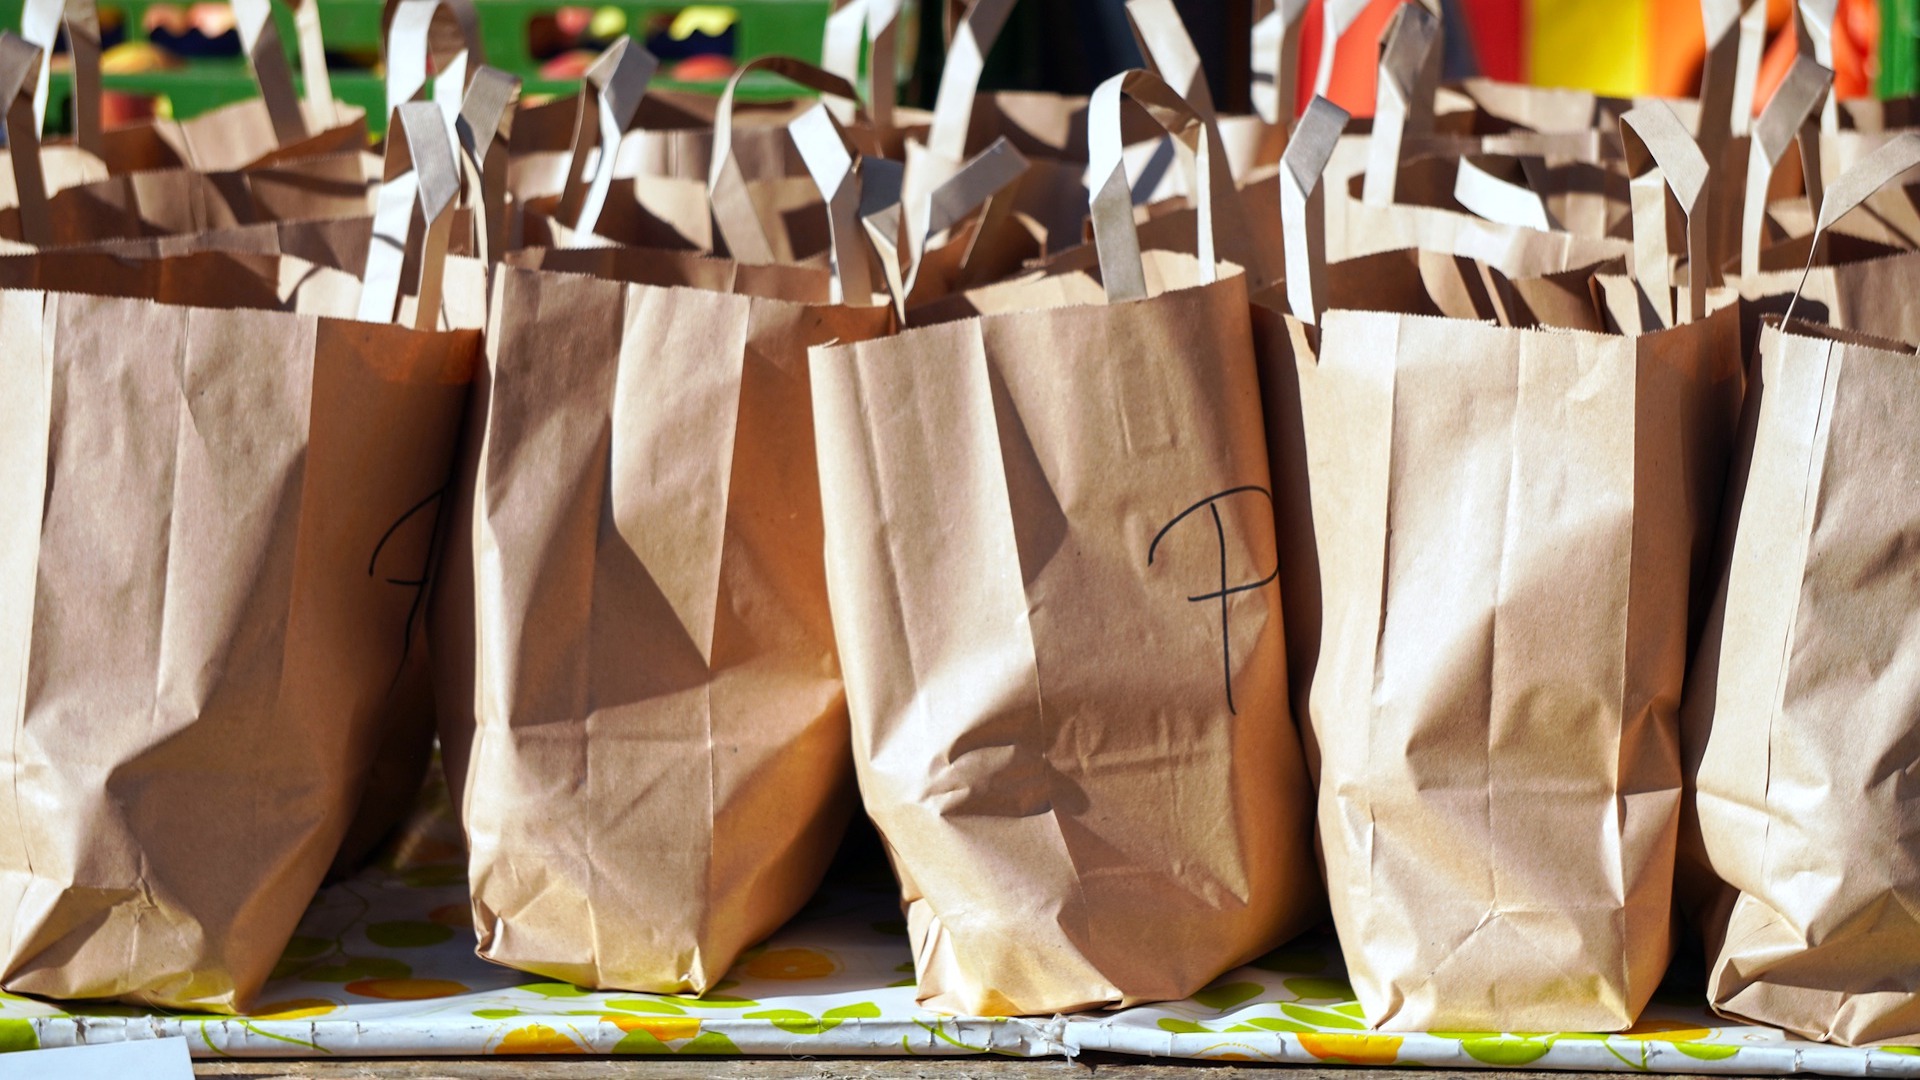 Brown paper bags lined up. The Government has refused to extend free school meals into half term